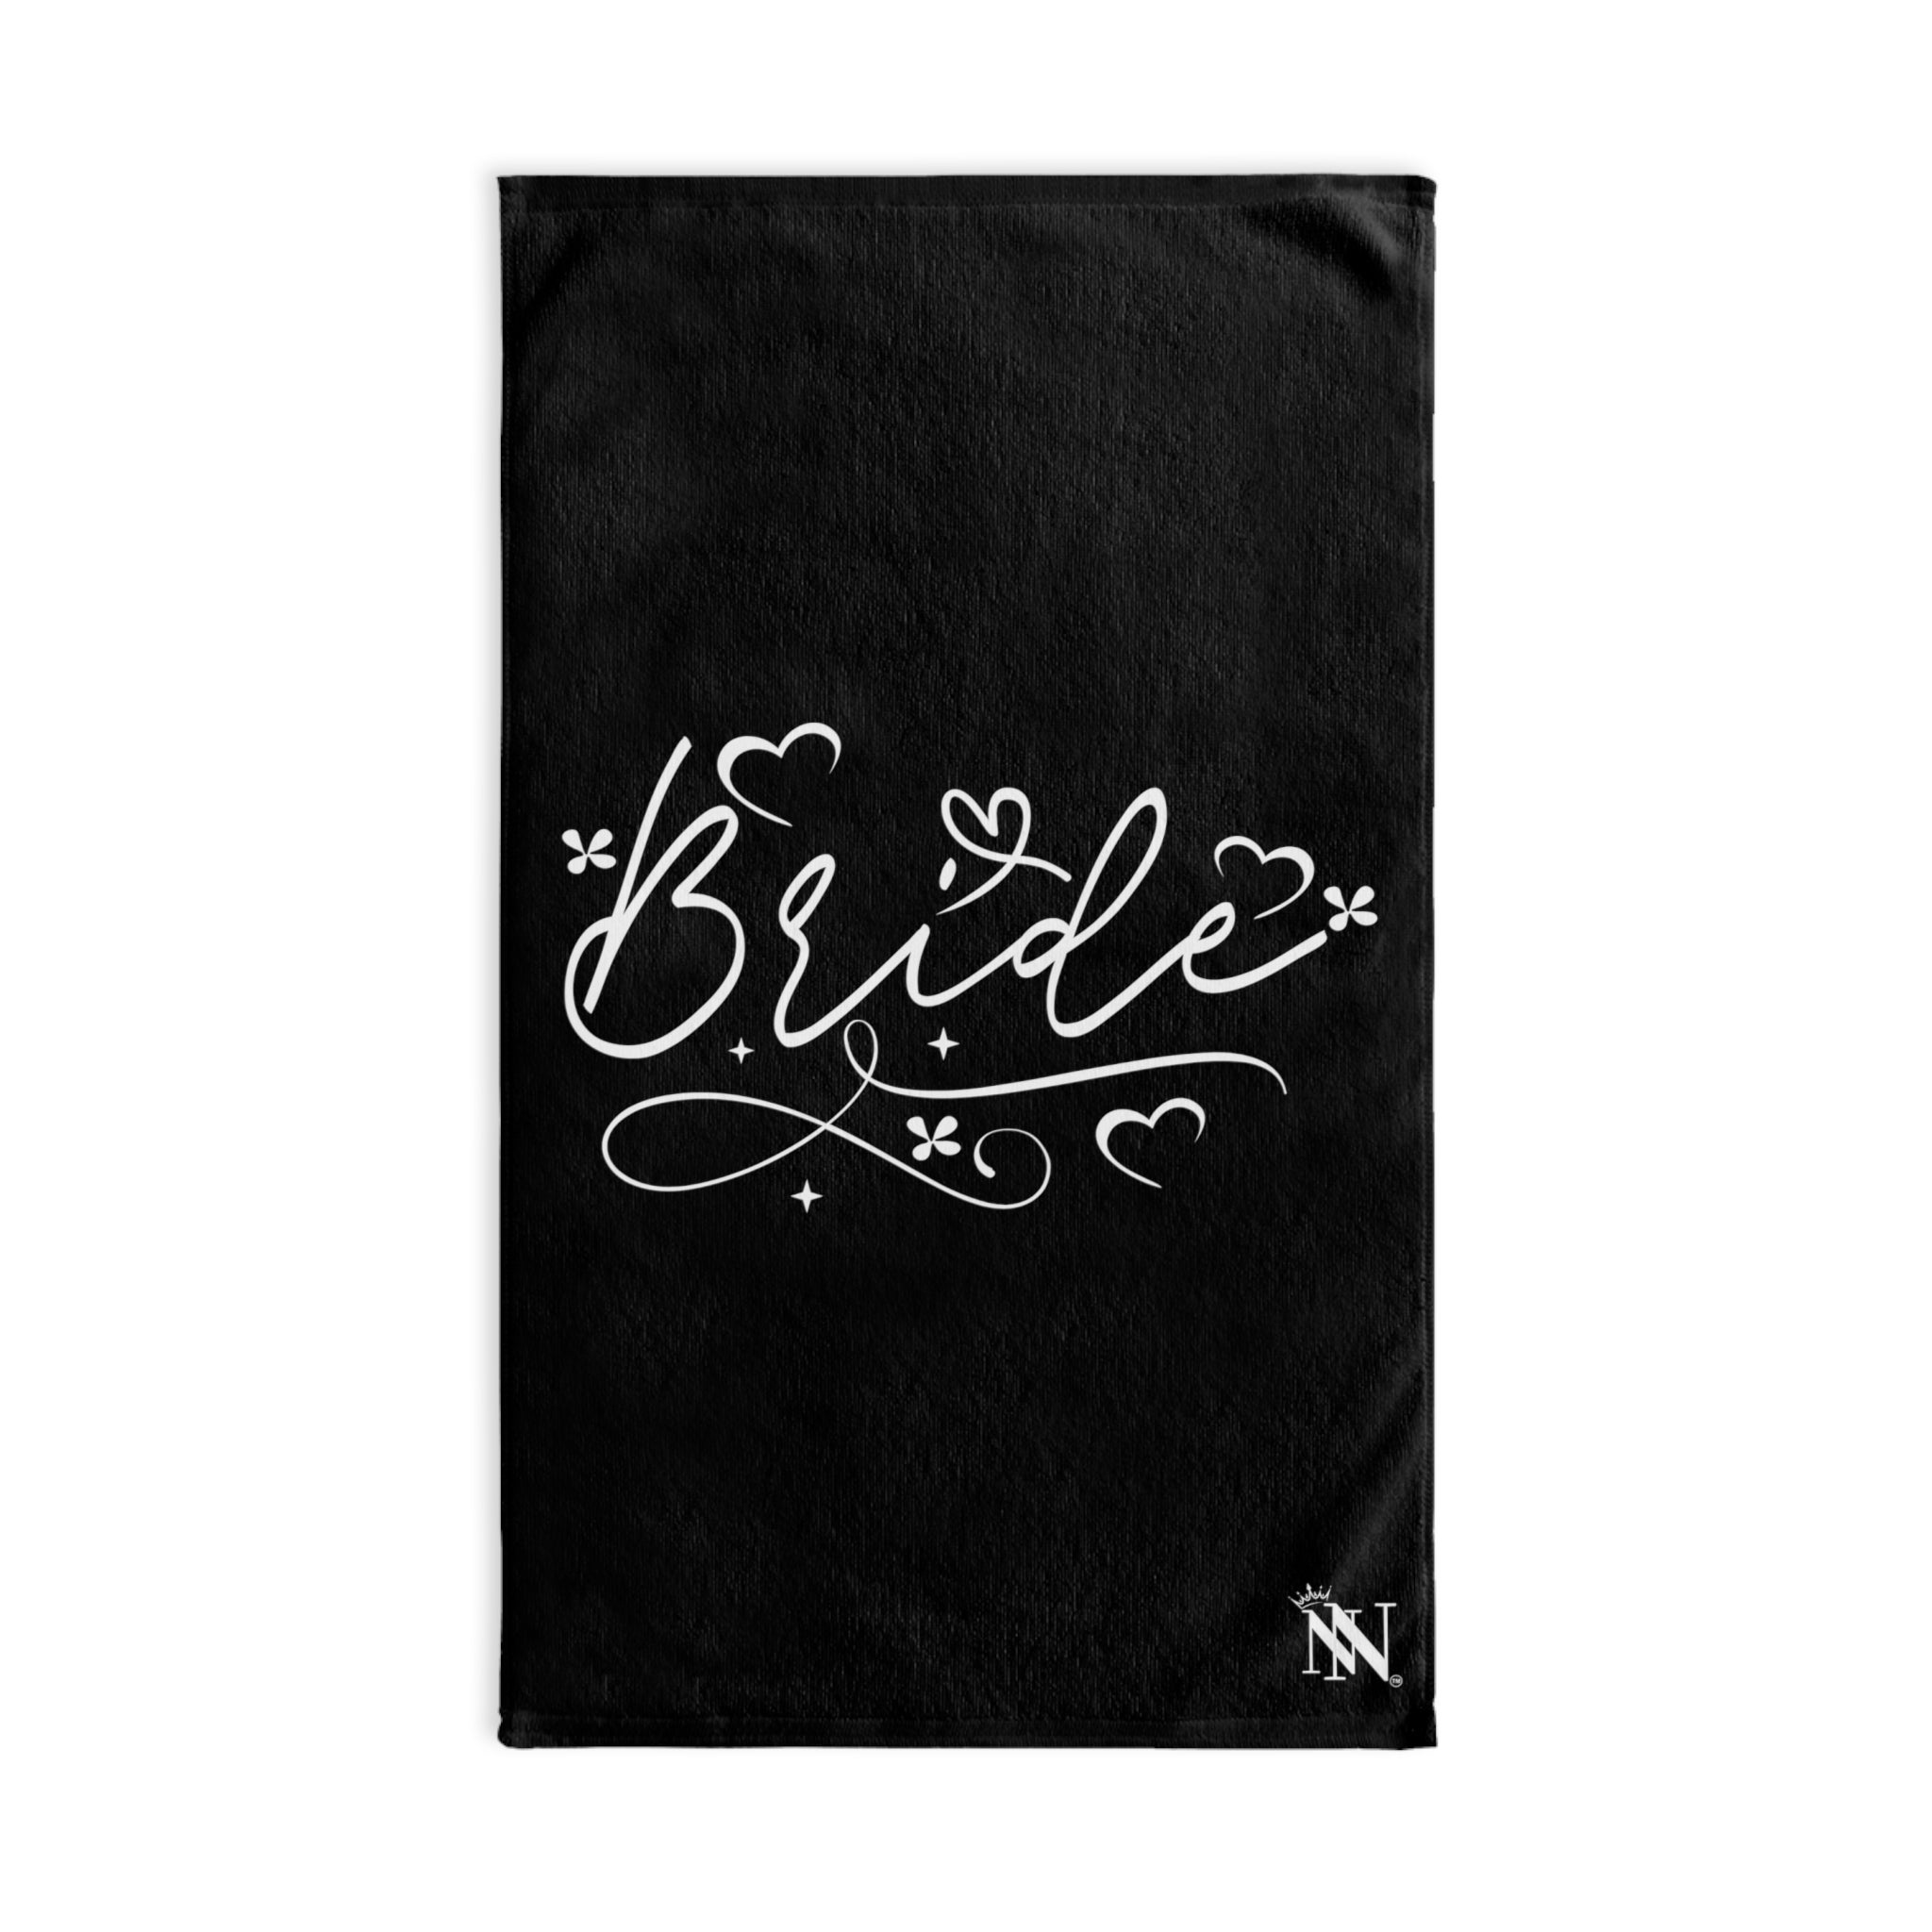 Bridal Heart Script Black | Sexy Gifts for Boyfriend, Funny Towel Romantic Gift for Wedding Couple Fiance First Year 2nd Anniversary Valentines, Party Gag Gifts, Joke Humor Cloth for Husband Men BF NECTAR NAPKINS